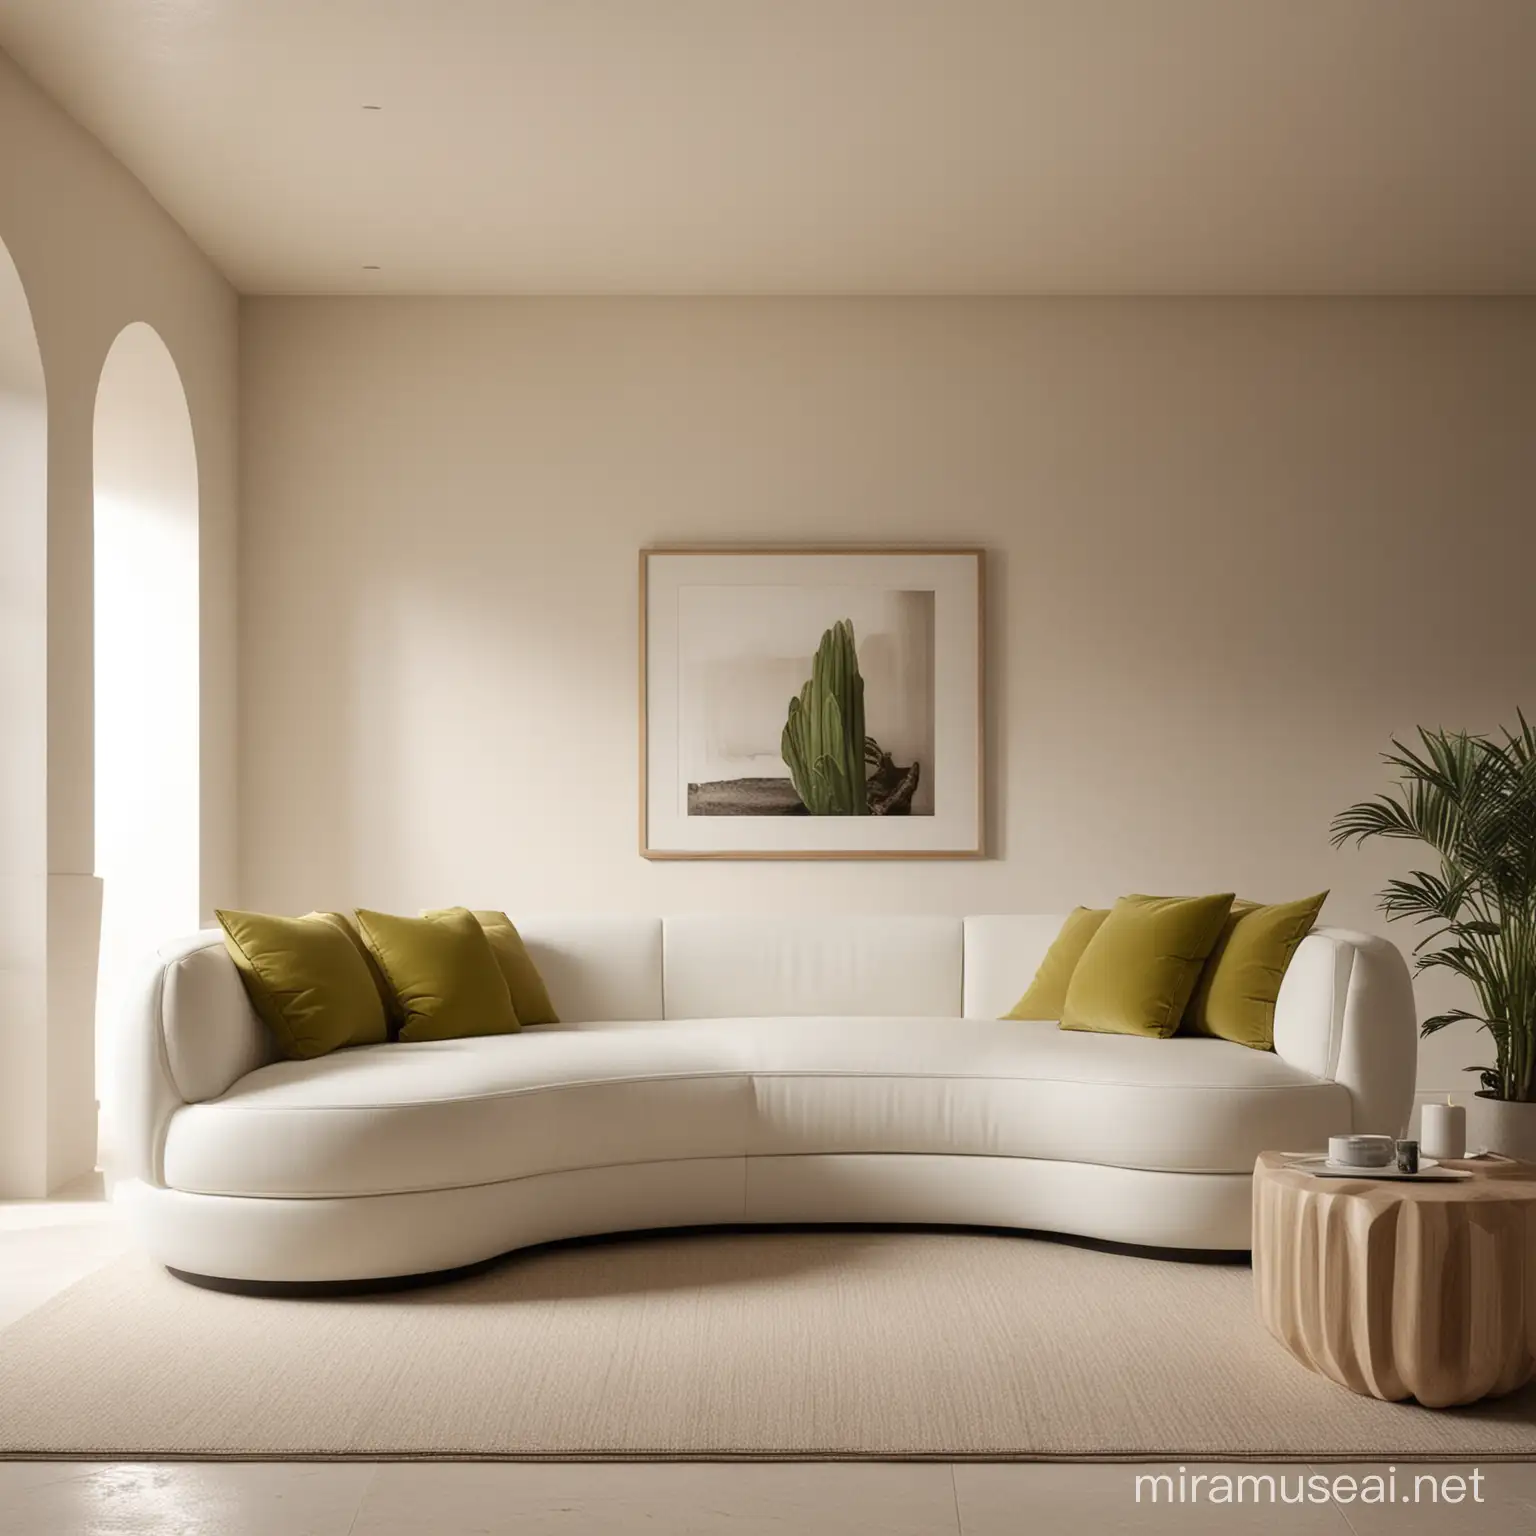 Futuristic Green Olive Themed Living Room with Fine Architecture